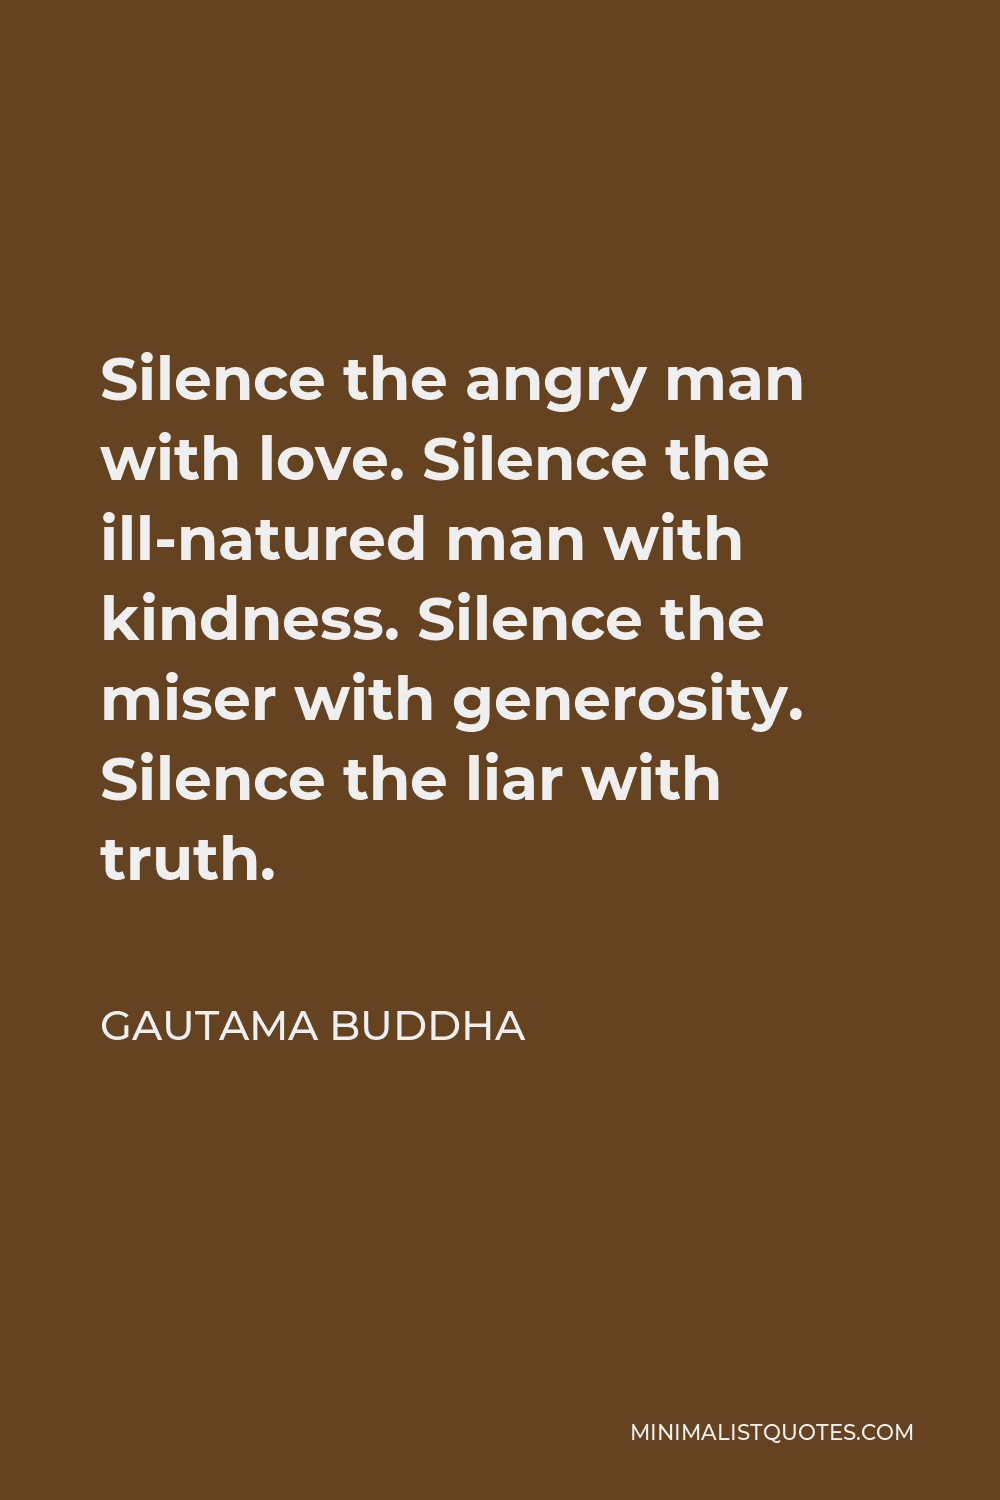 Gautama Buddha Quote - Silence the angry man with love. Silence the ill-natured man with kindness. Silence the miser with generosity. Silence the liar with truth.